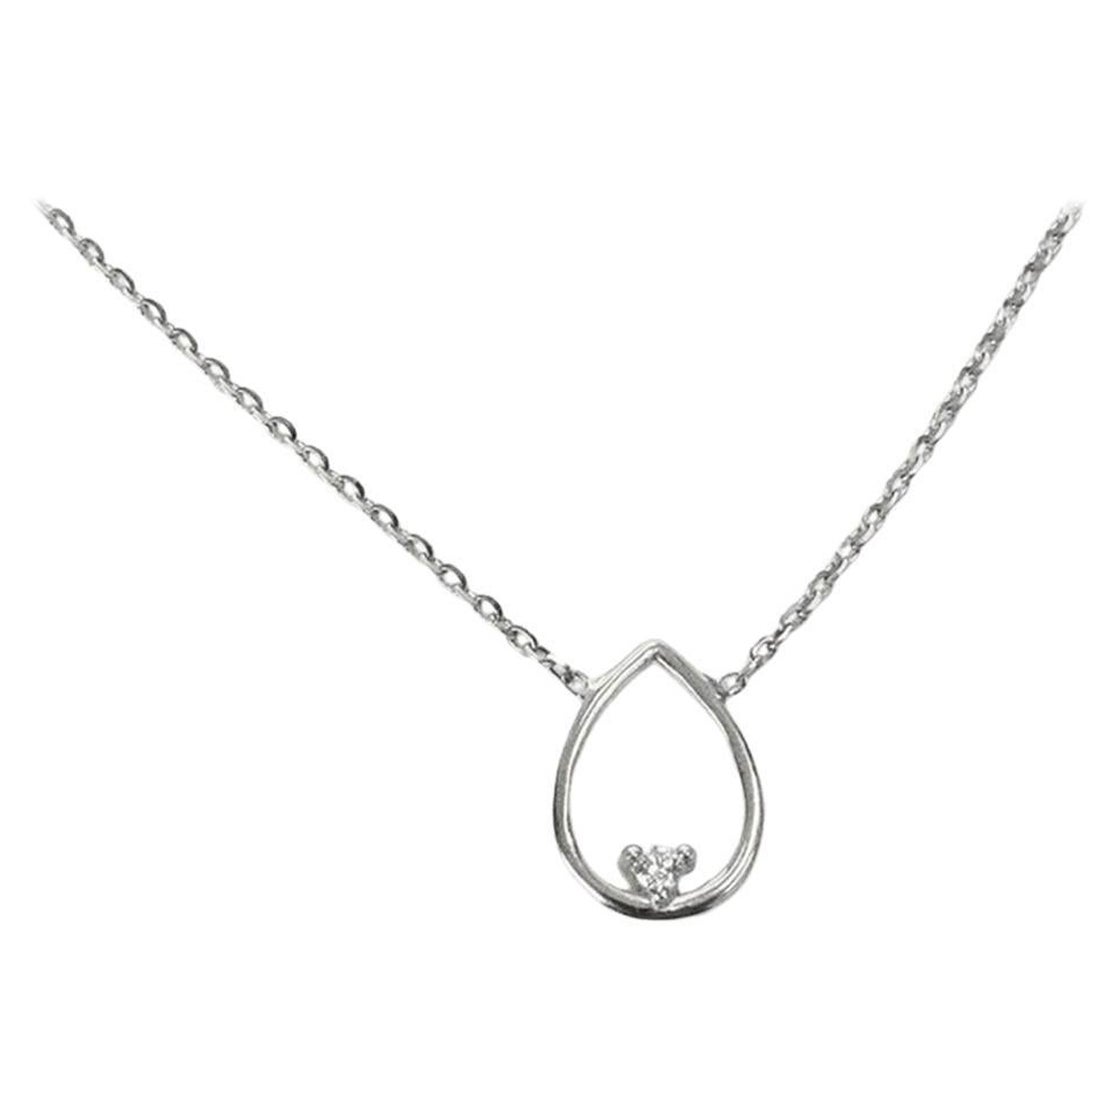 Gold Diamond Necklace is made of 18k solid gold available in three colors of gold, White Gold / Rose Gold / Yellow Gold.

Natural genuine round cut diamond each diamond is hand selected by me to ensure quality and set by a master setter in our